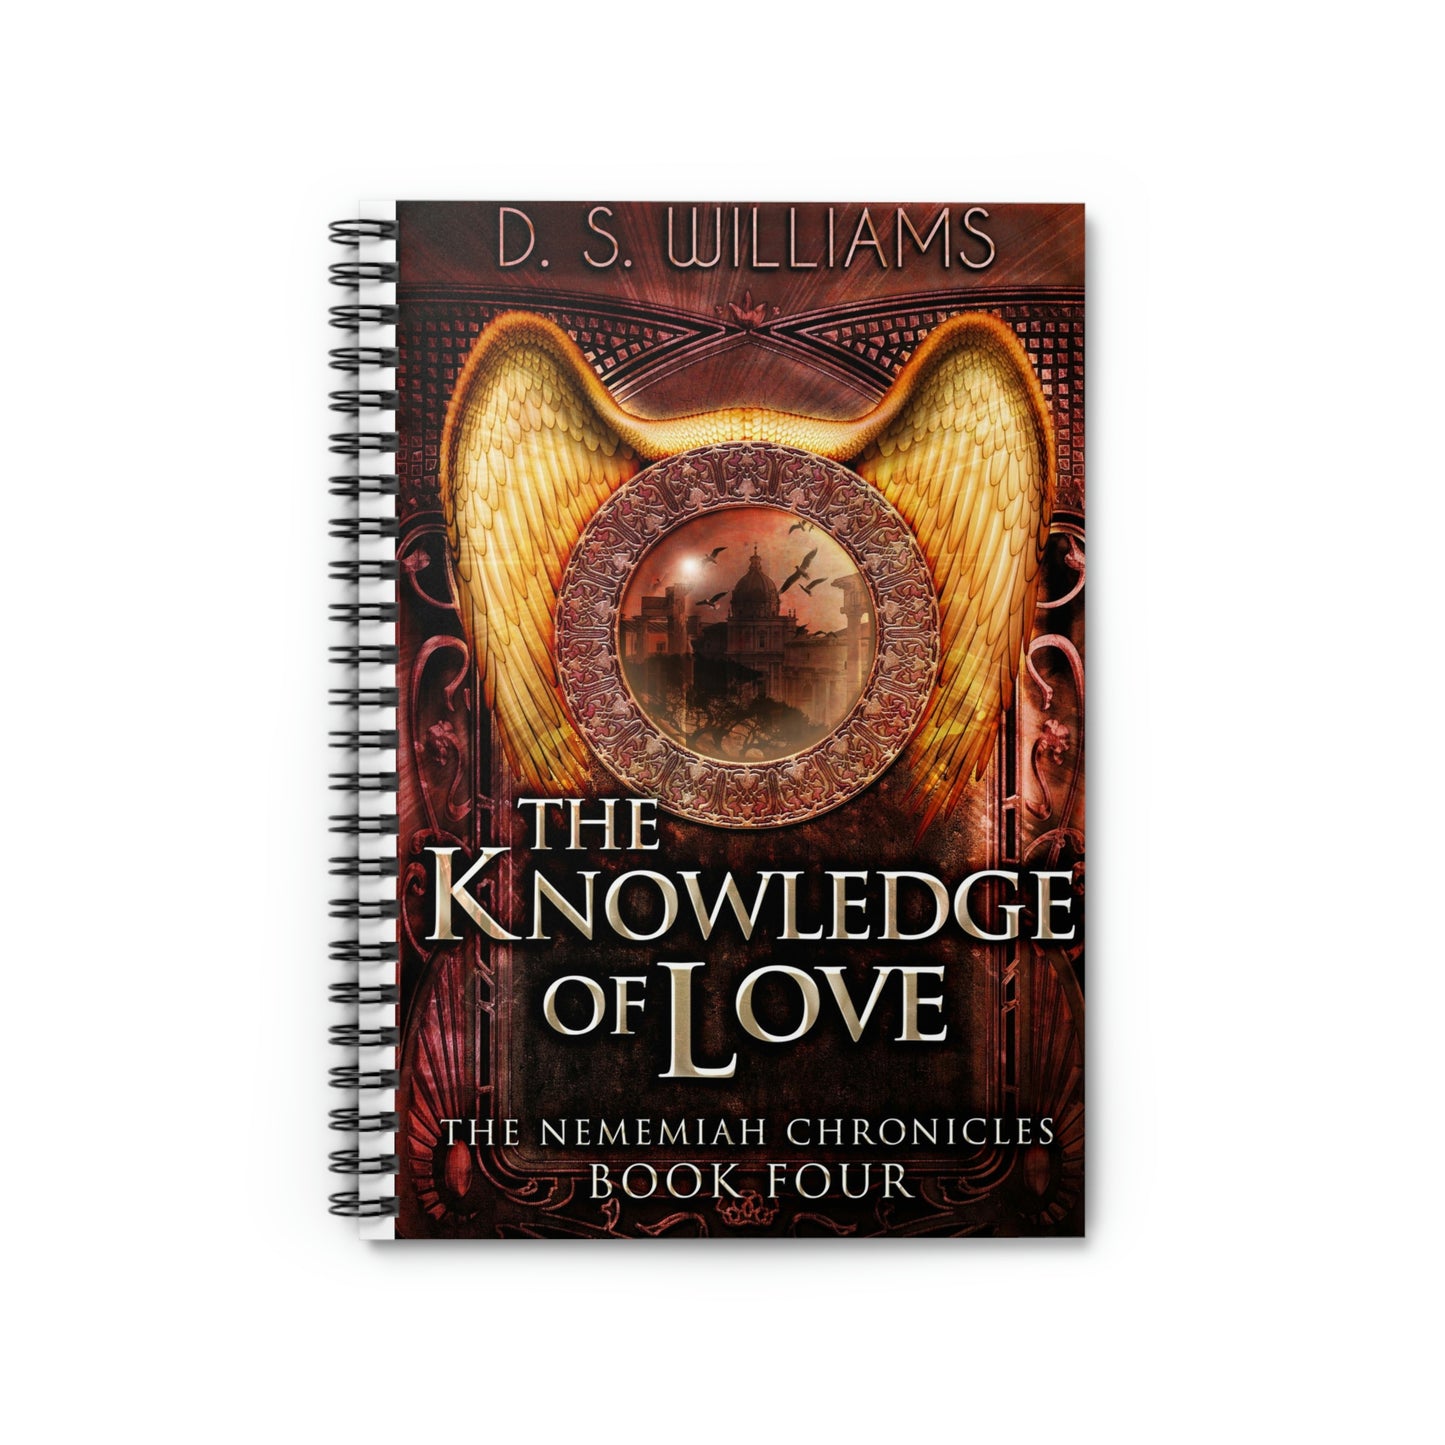 The Knowledge of Love - Spiral Notebook